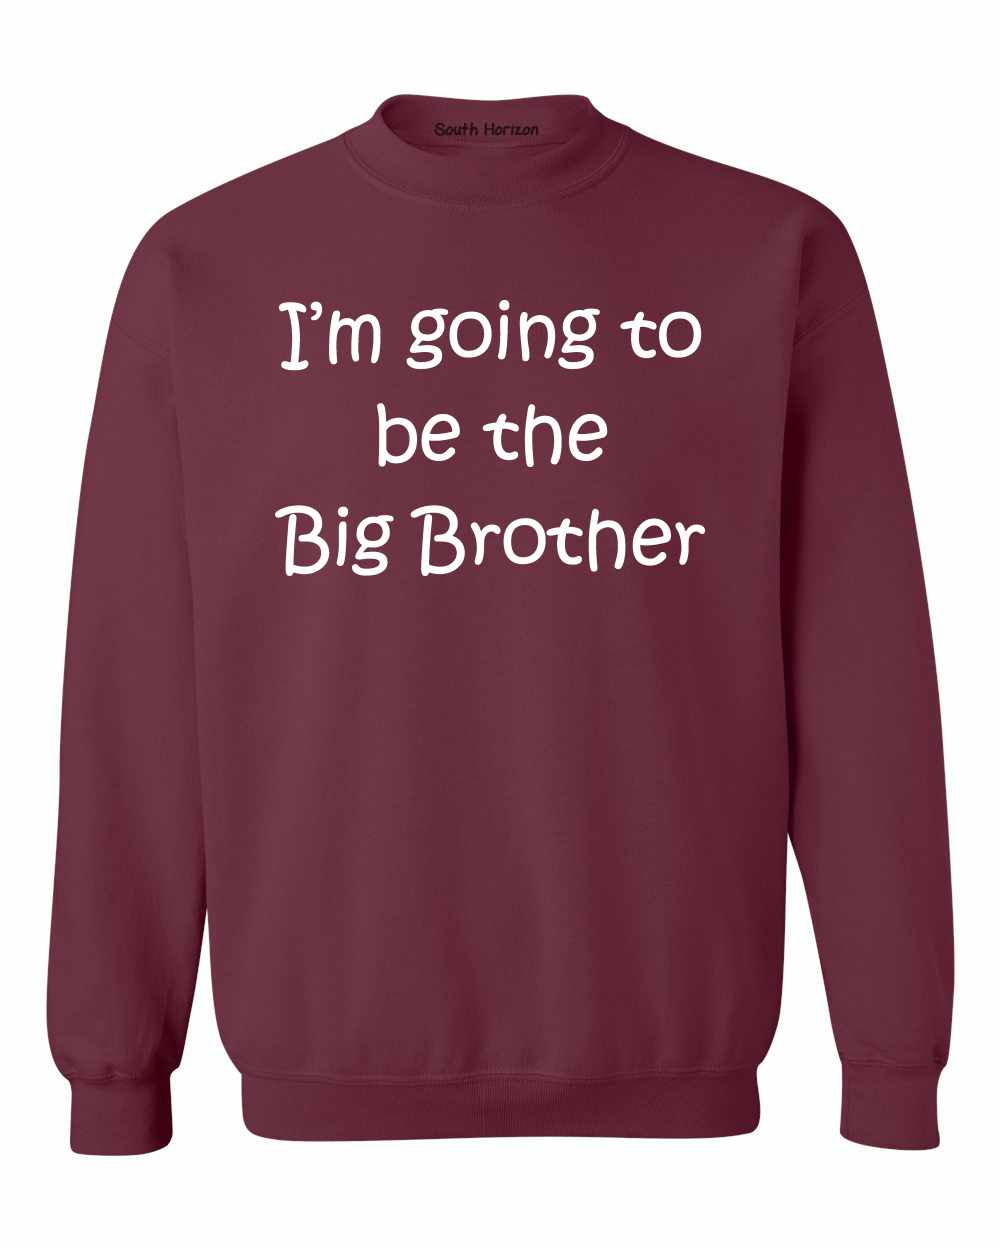 I'M GOING TO BE THE BIG BROTHER on SweatShirt (#518-11)